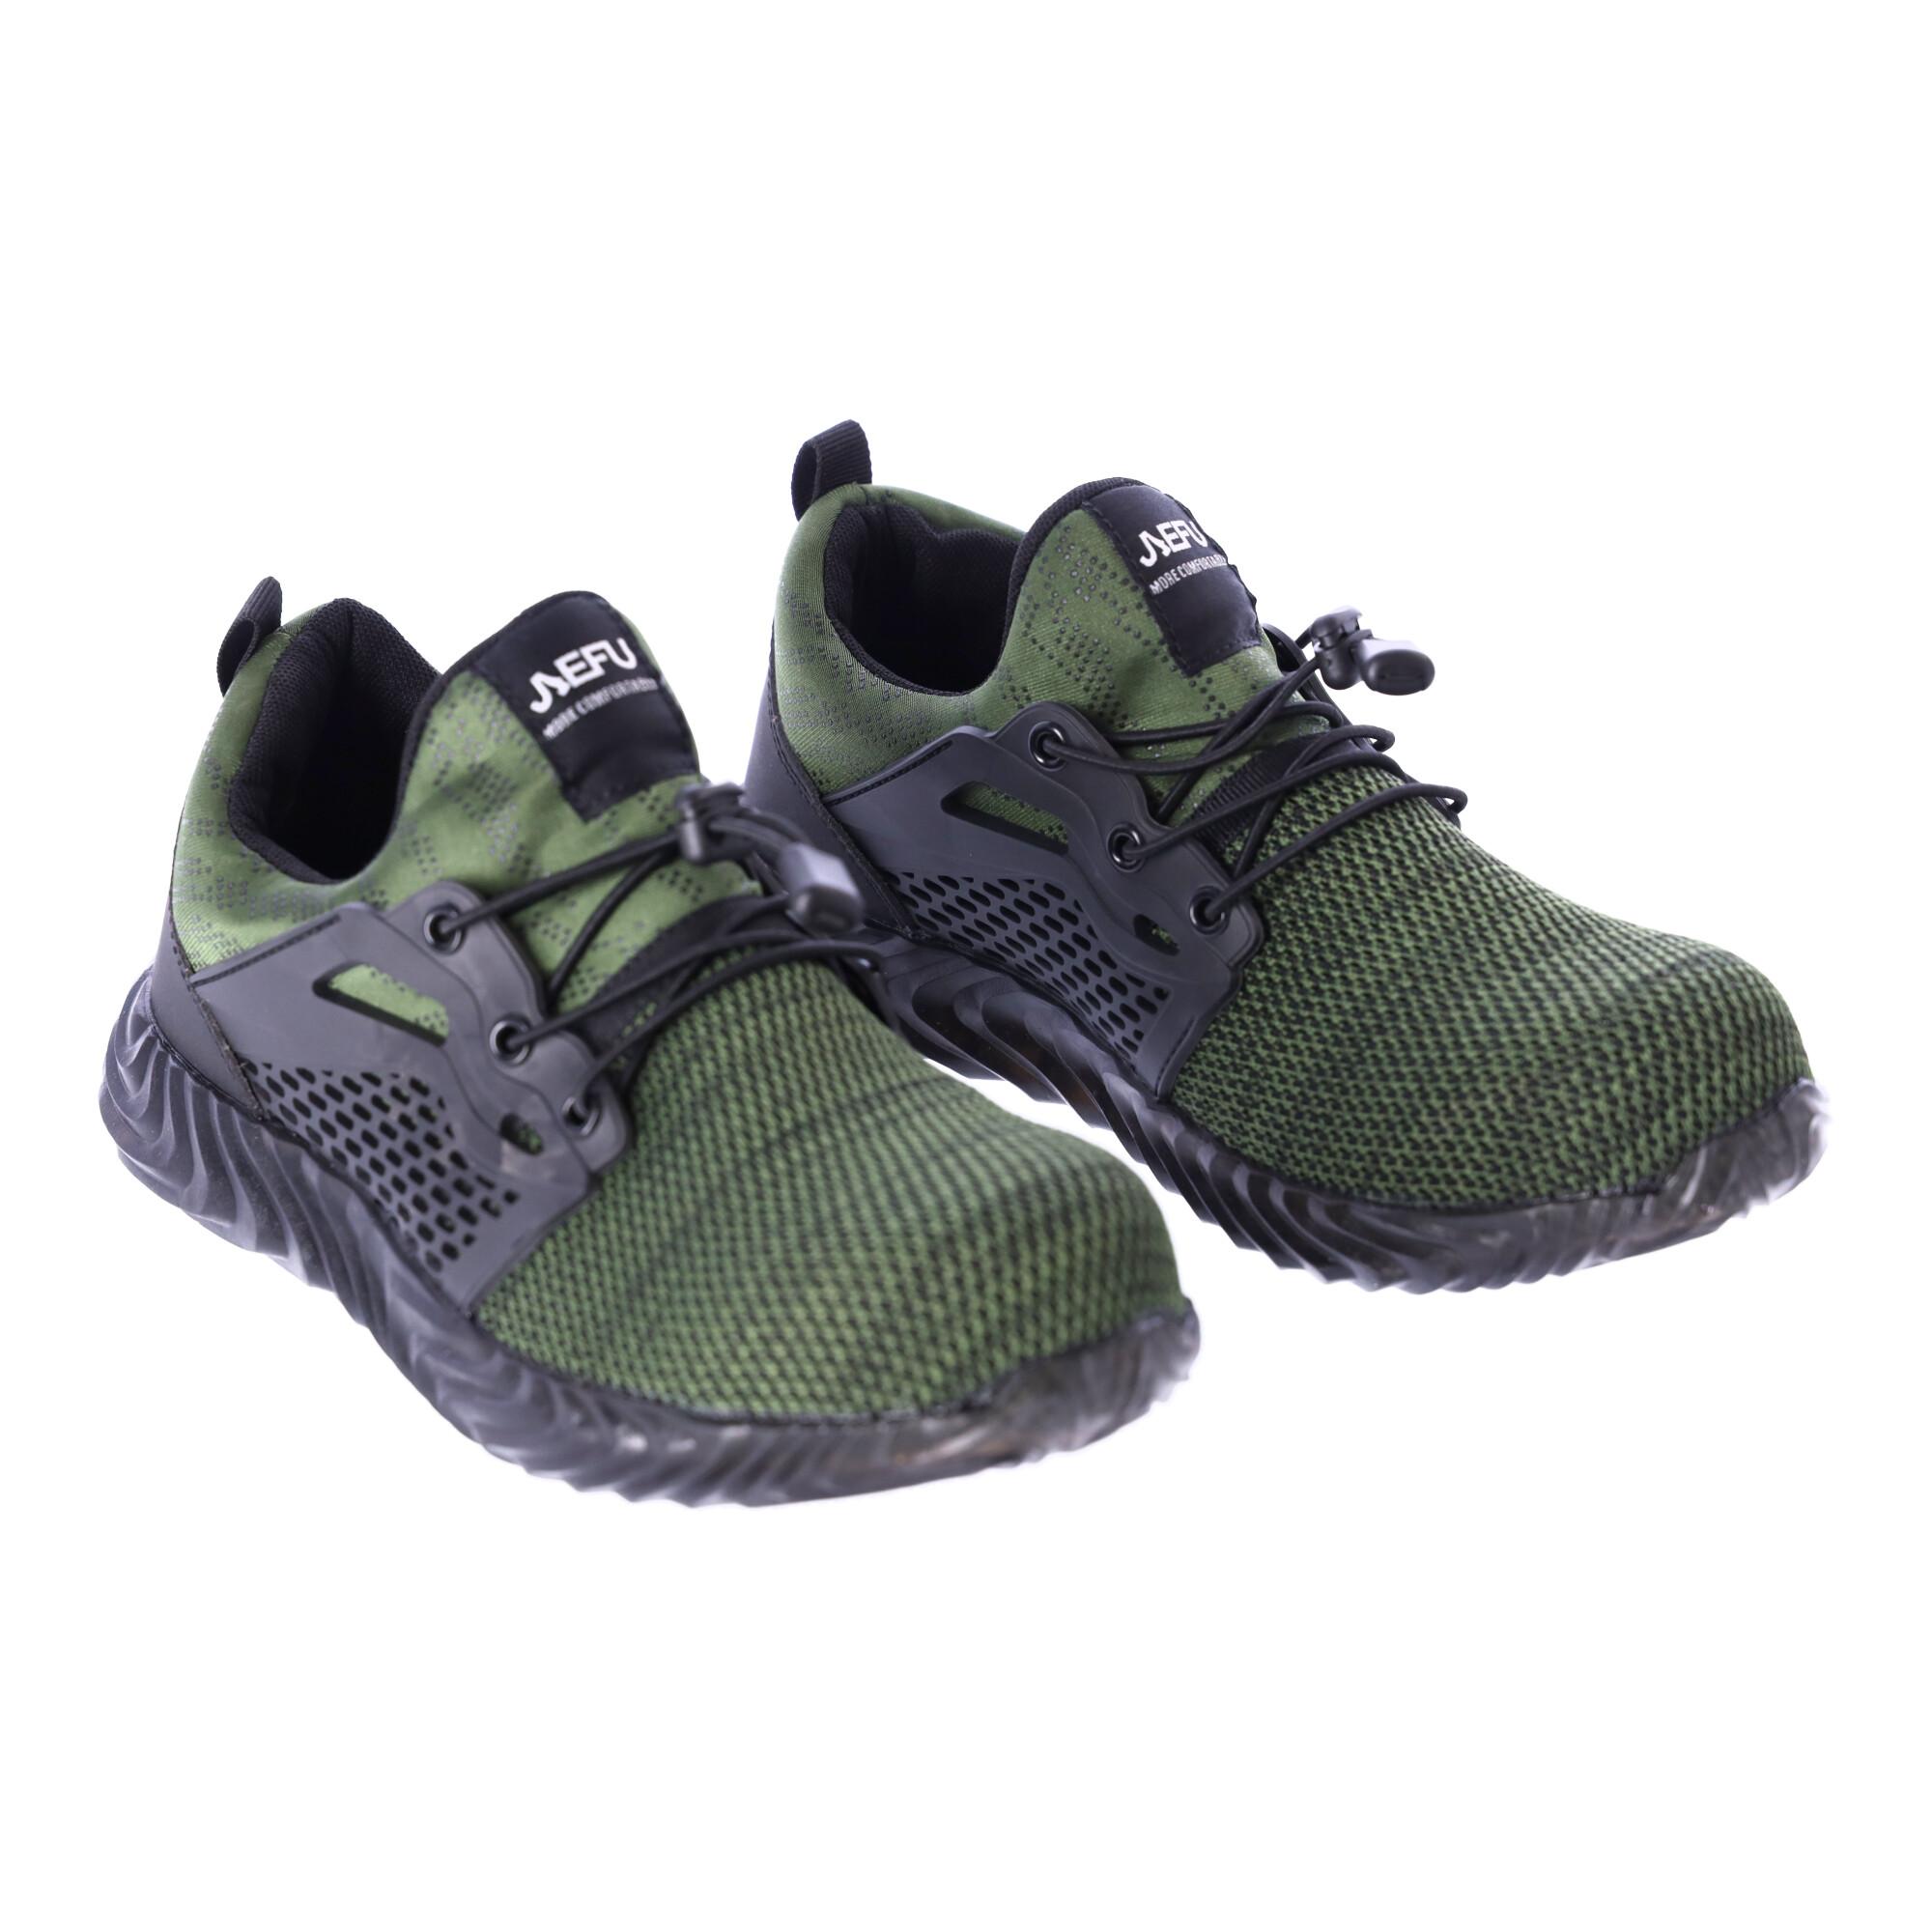 Work safety shoes "45" - green